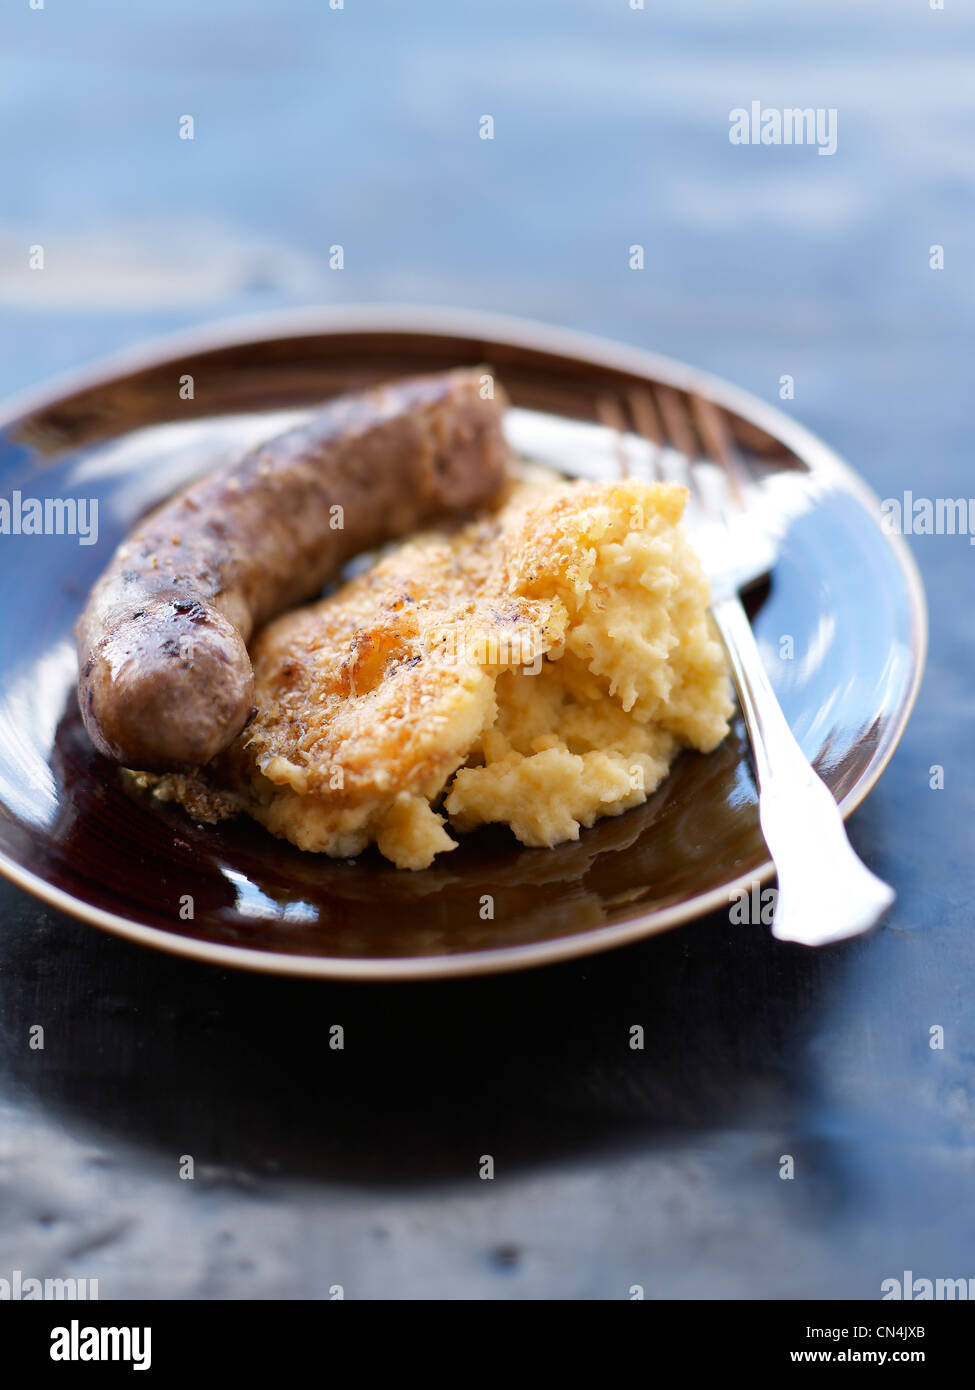 France, Larzac, Aveyron, feature: Epic Pork, sausage and mashed Stock Photo